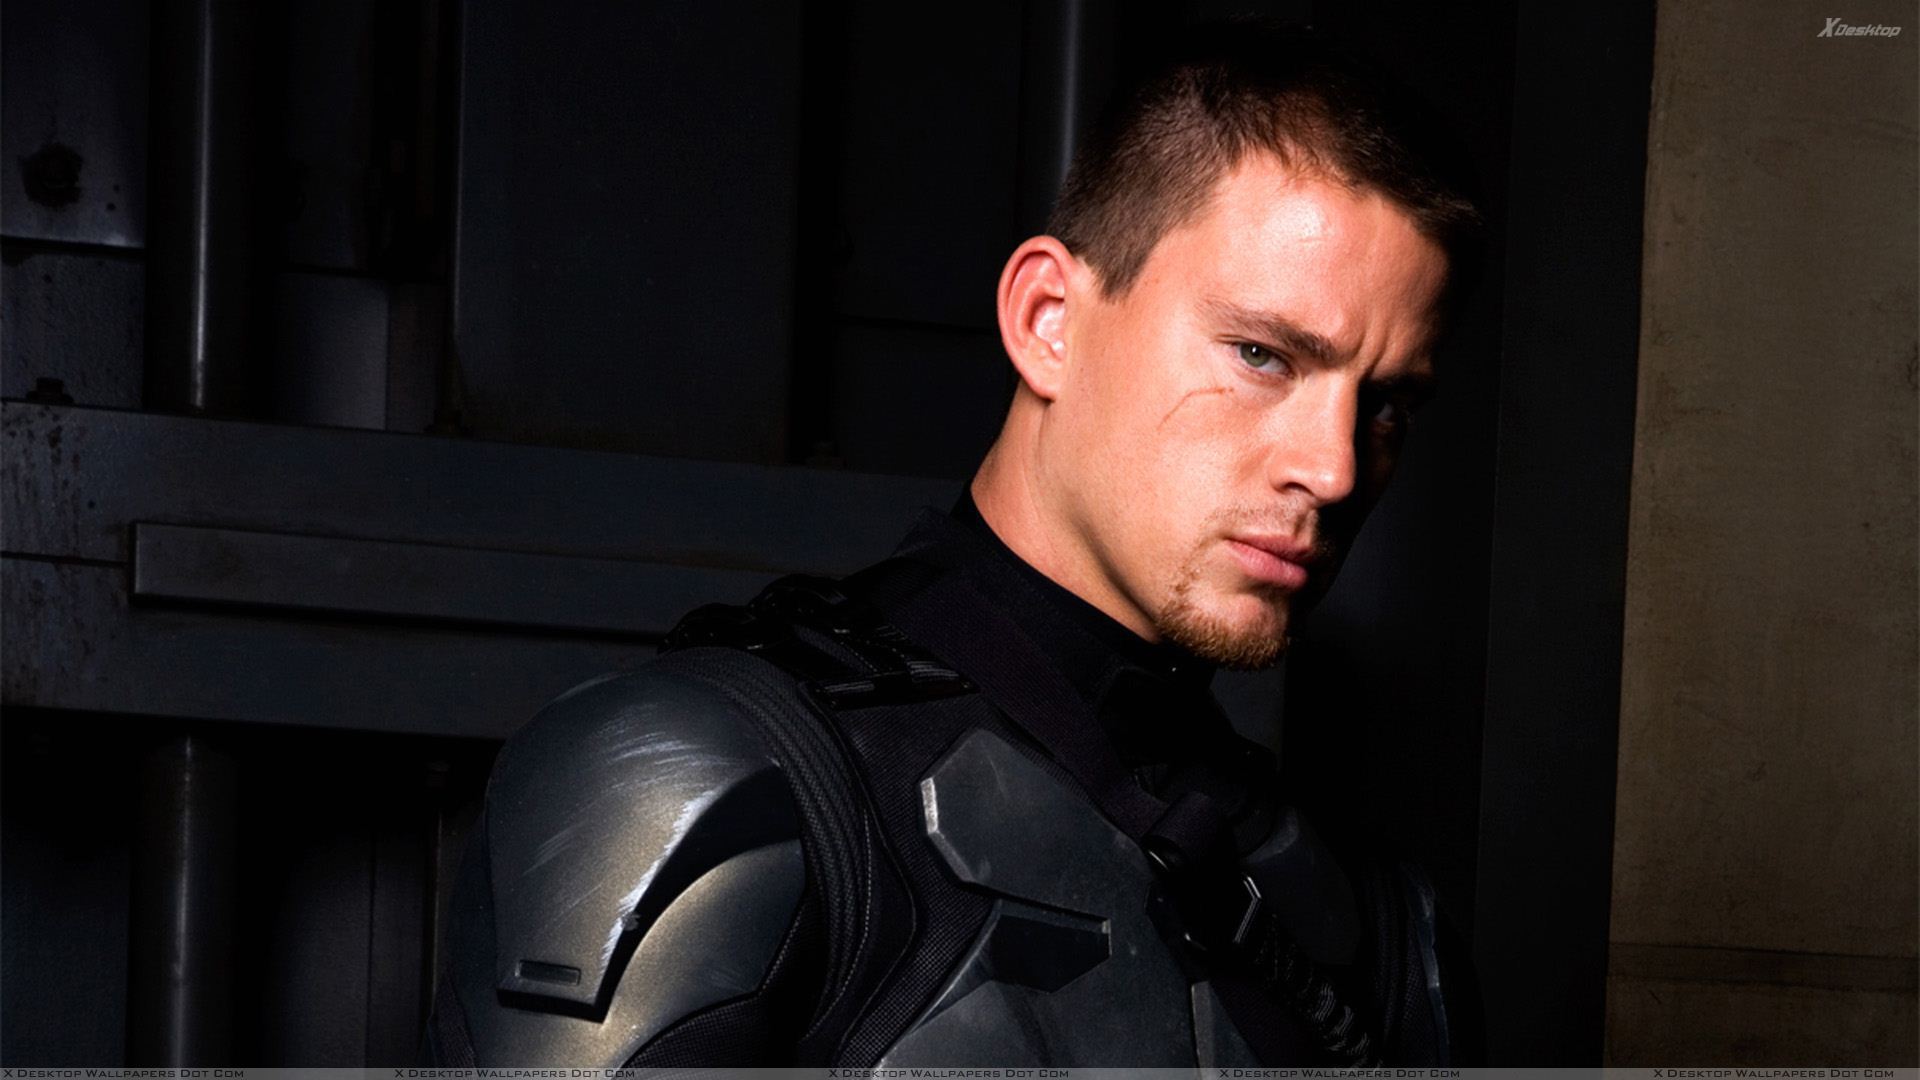 Movie Actor Channing Tatum Wallpaper And Image